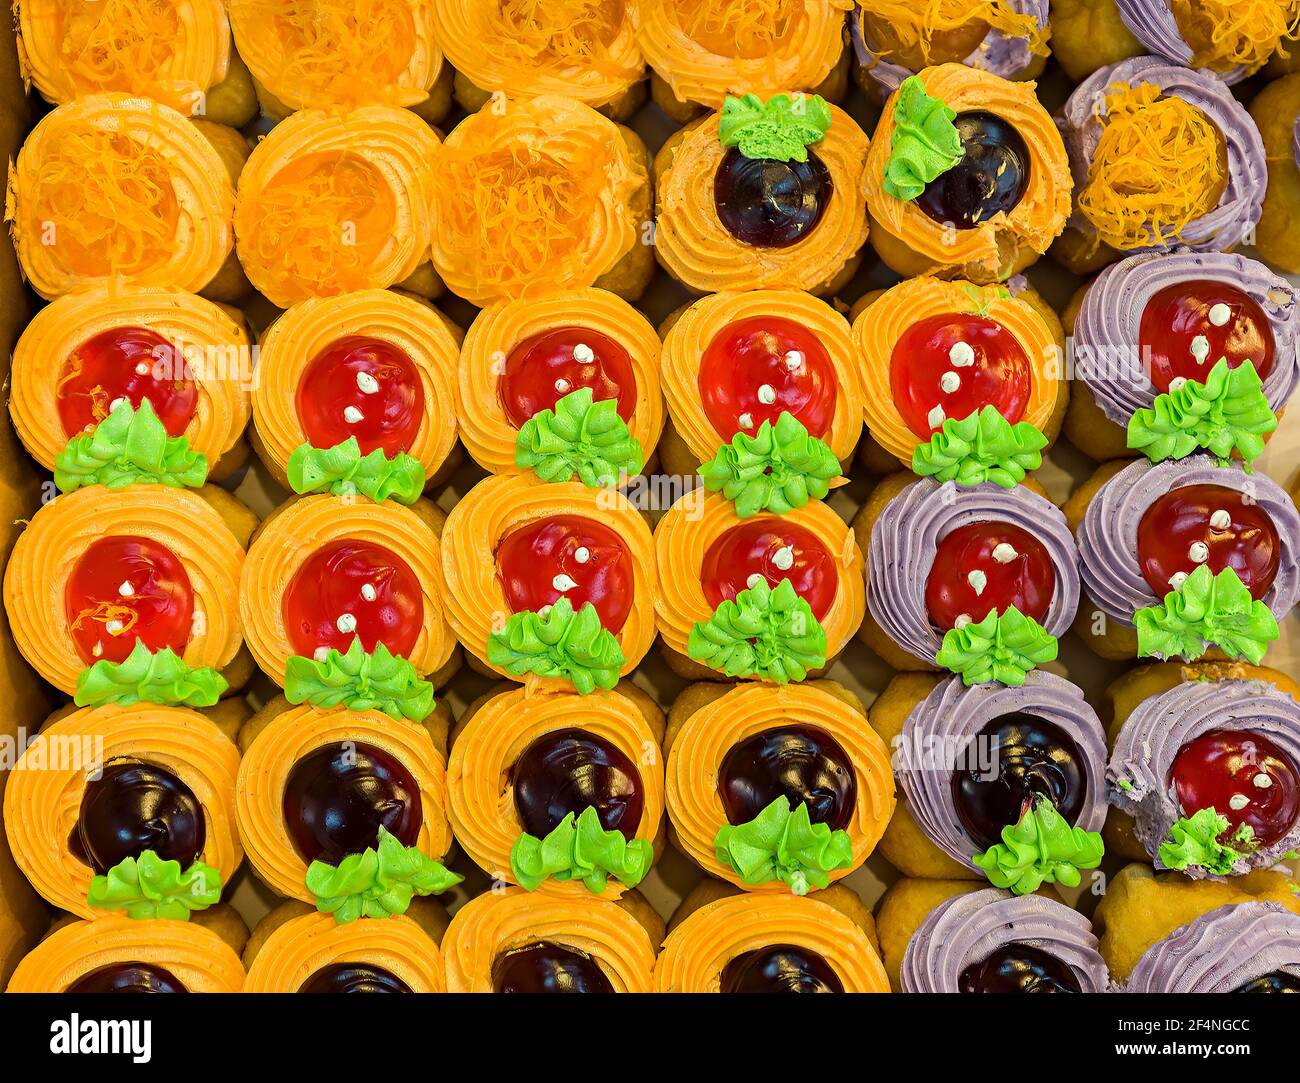 Confectionary on sale in Pakse, Laos Stock Photo